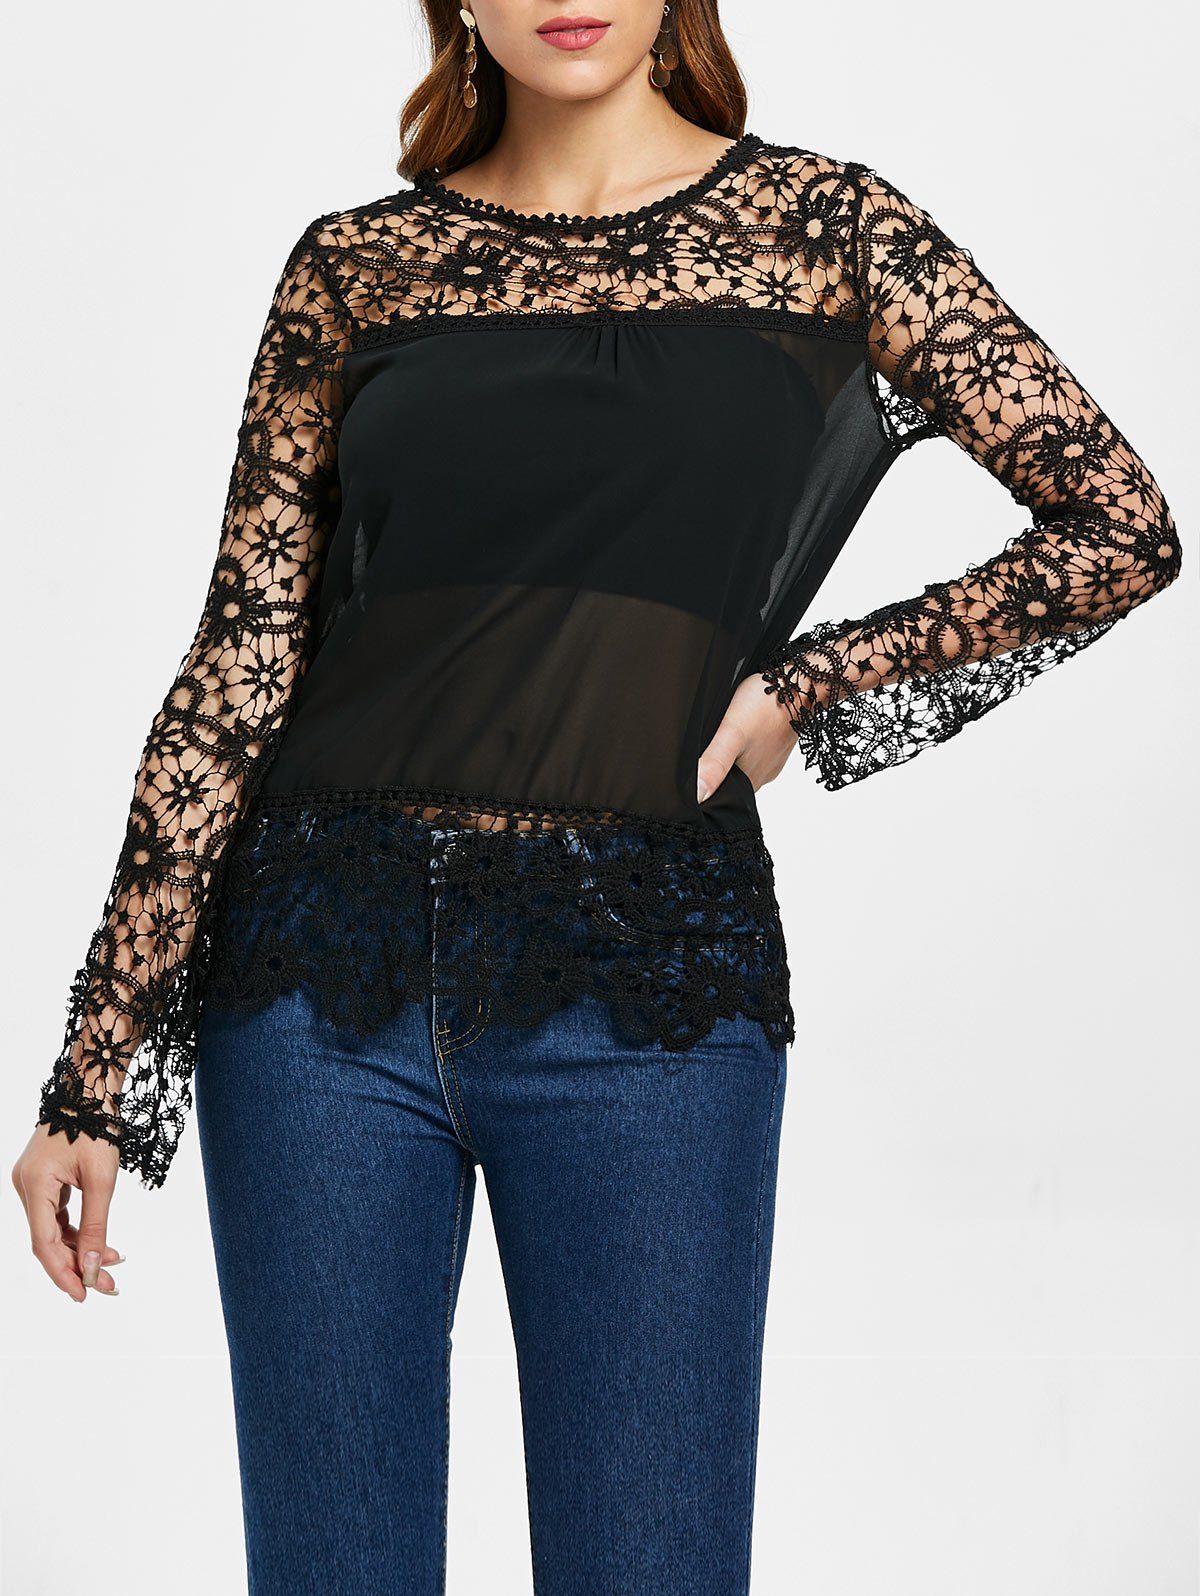 

Stylish Round Neck Long Sleeve Spliced Hollow Out Women's Blouse, Black